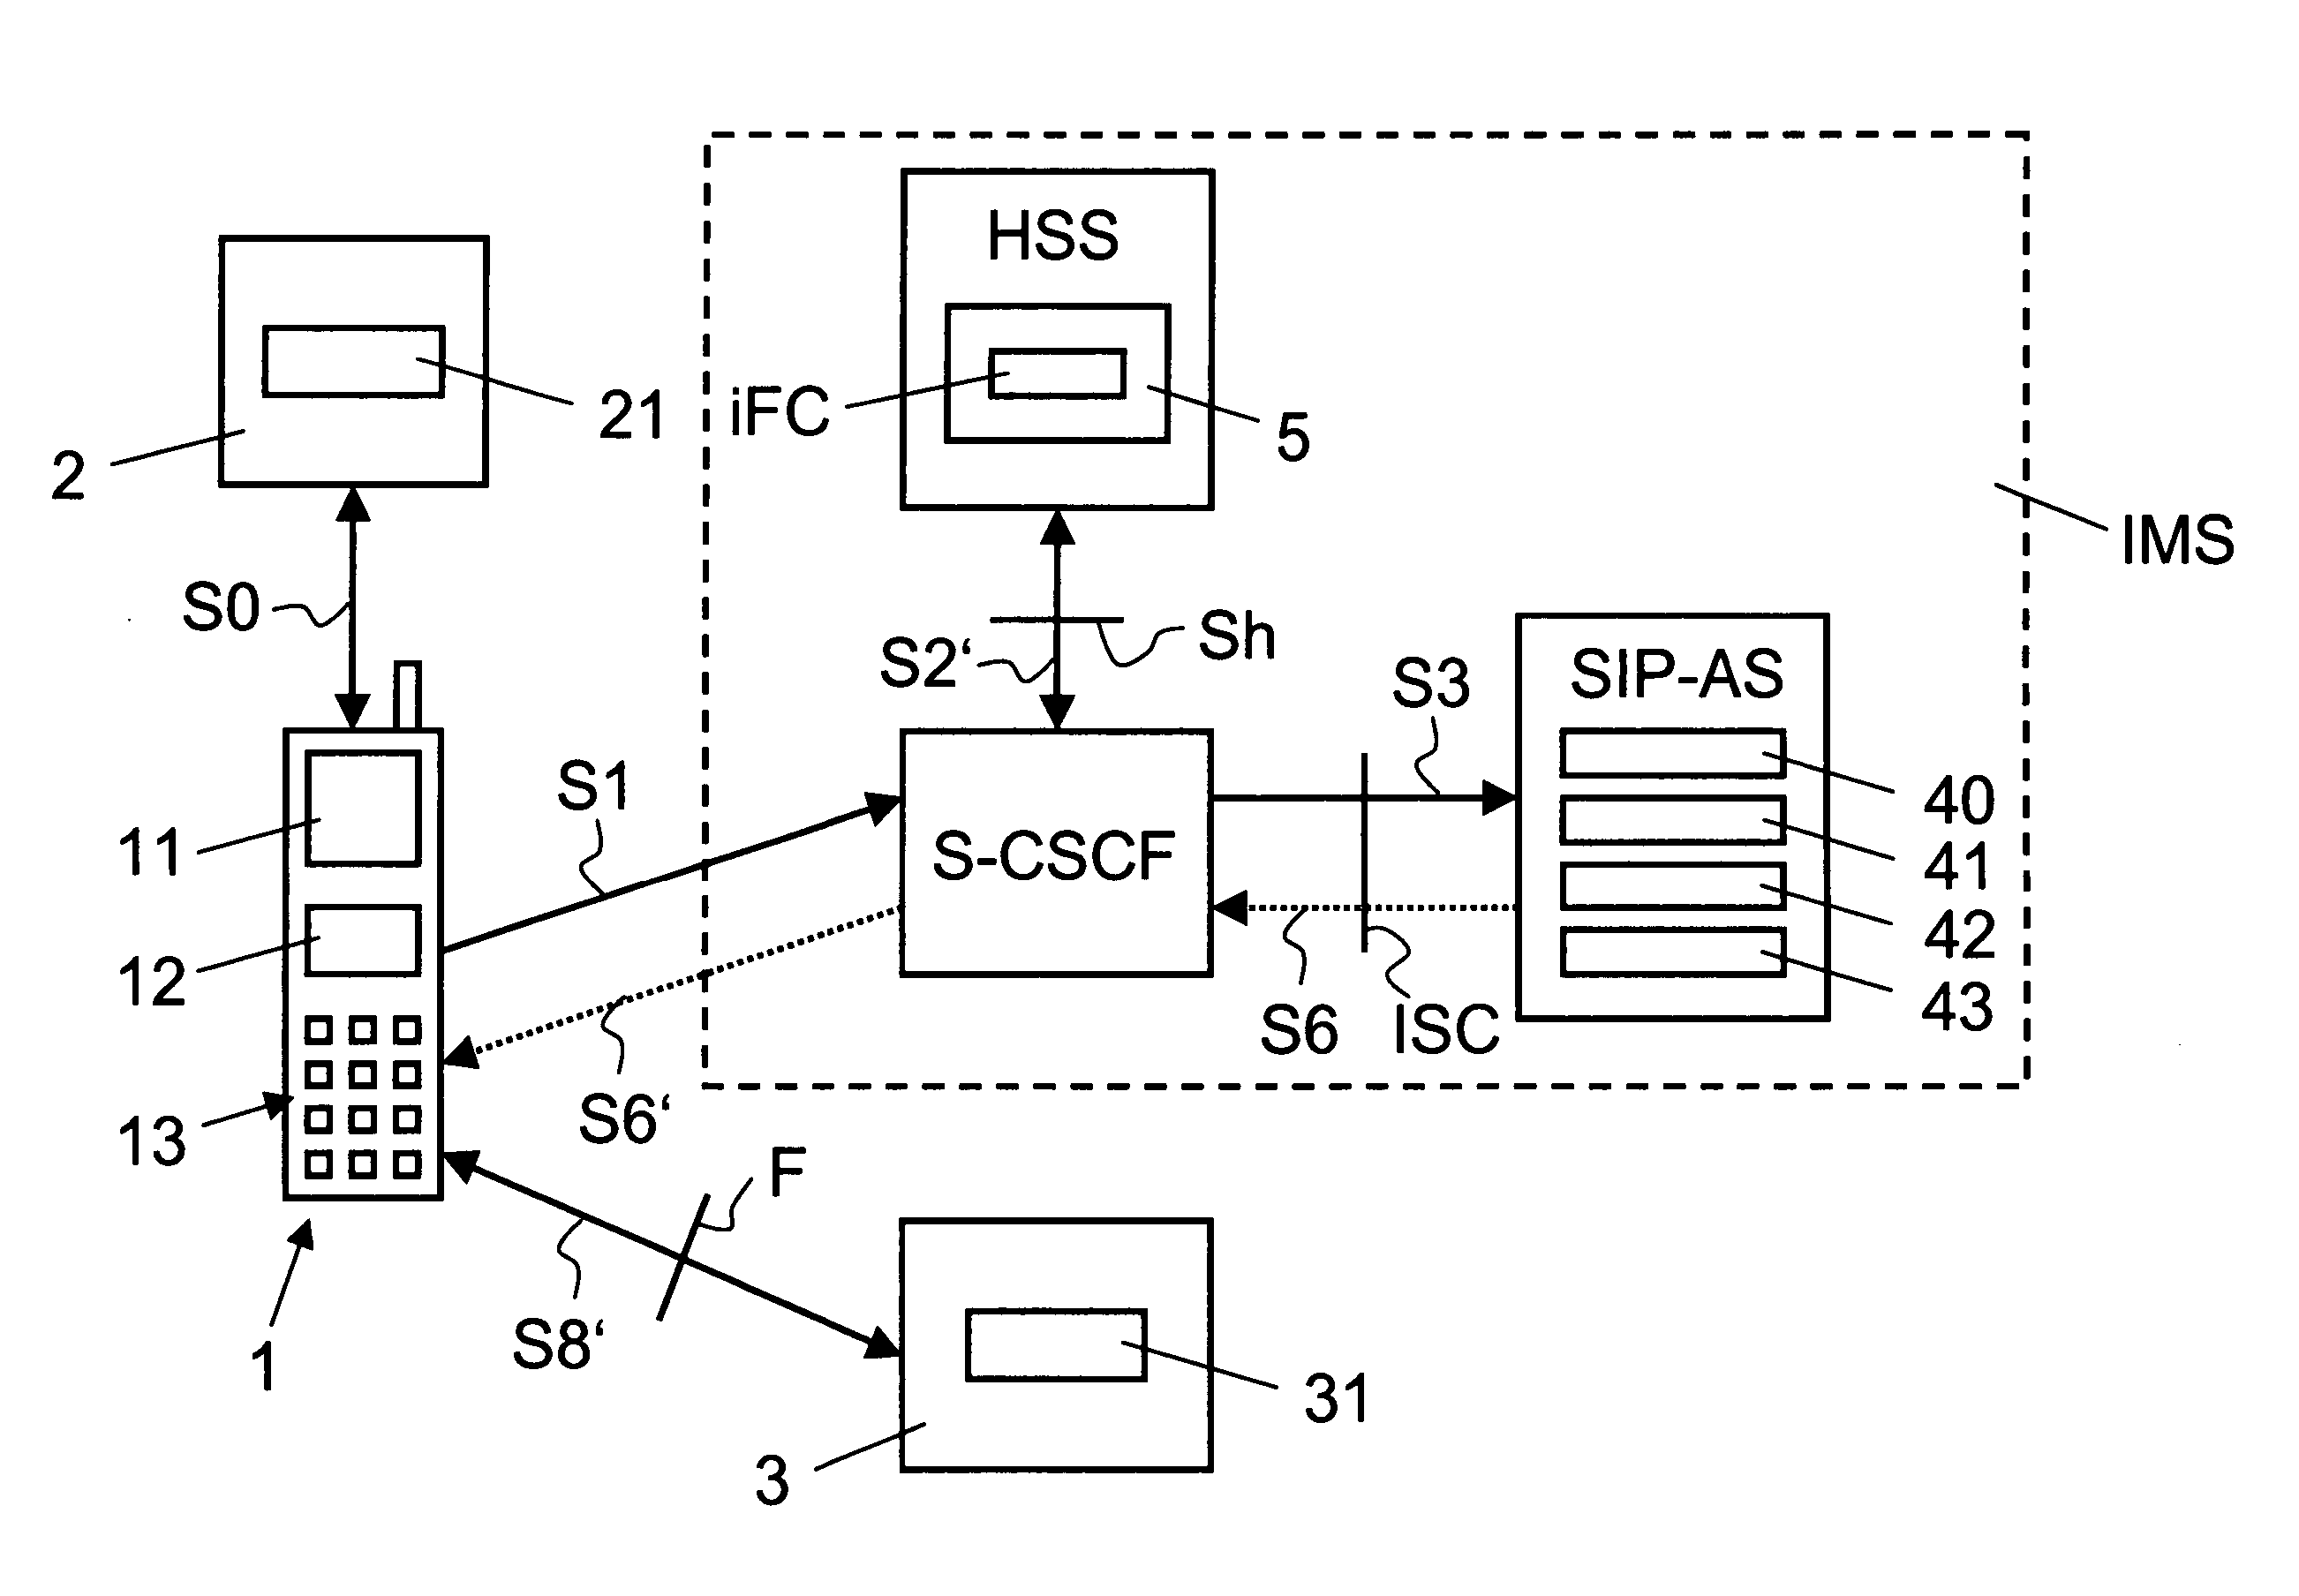 Method and system for providing media content to a user